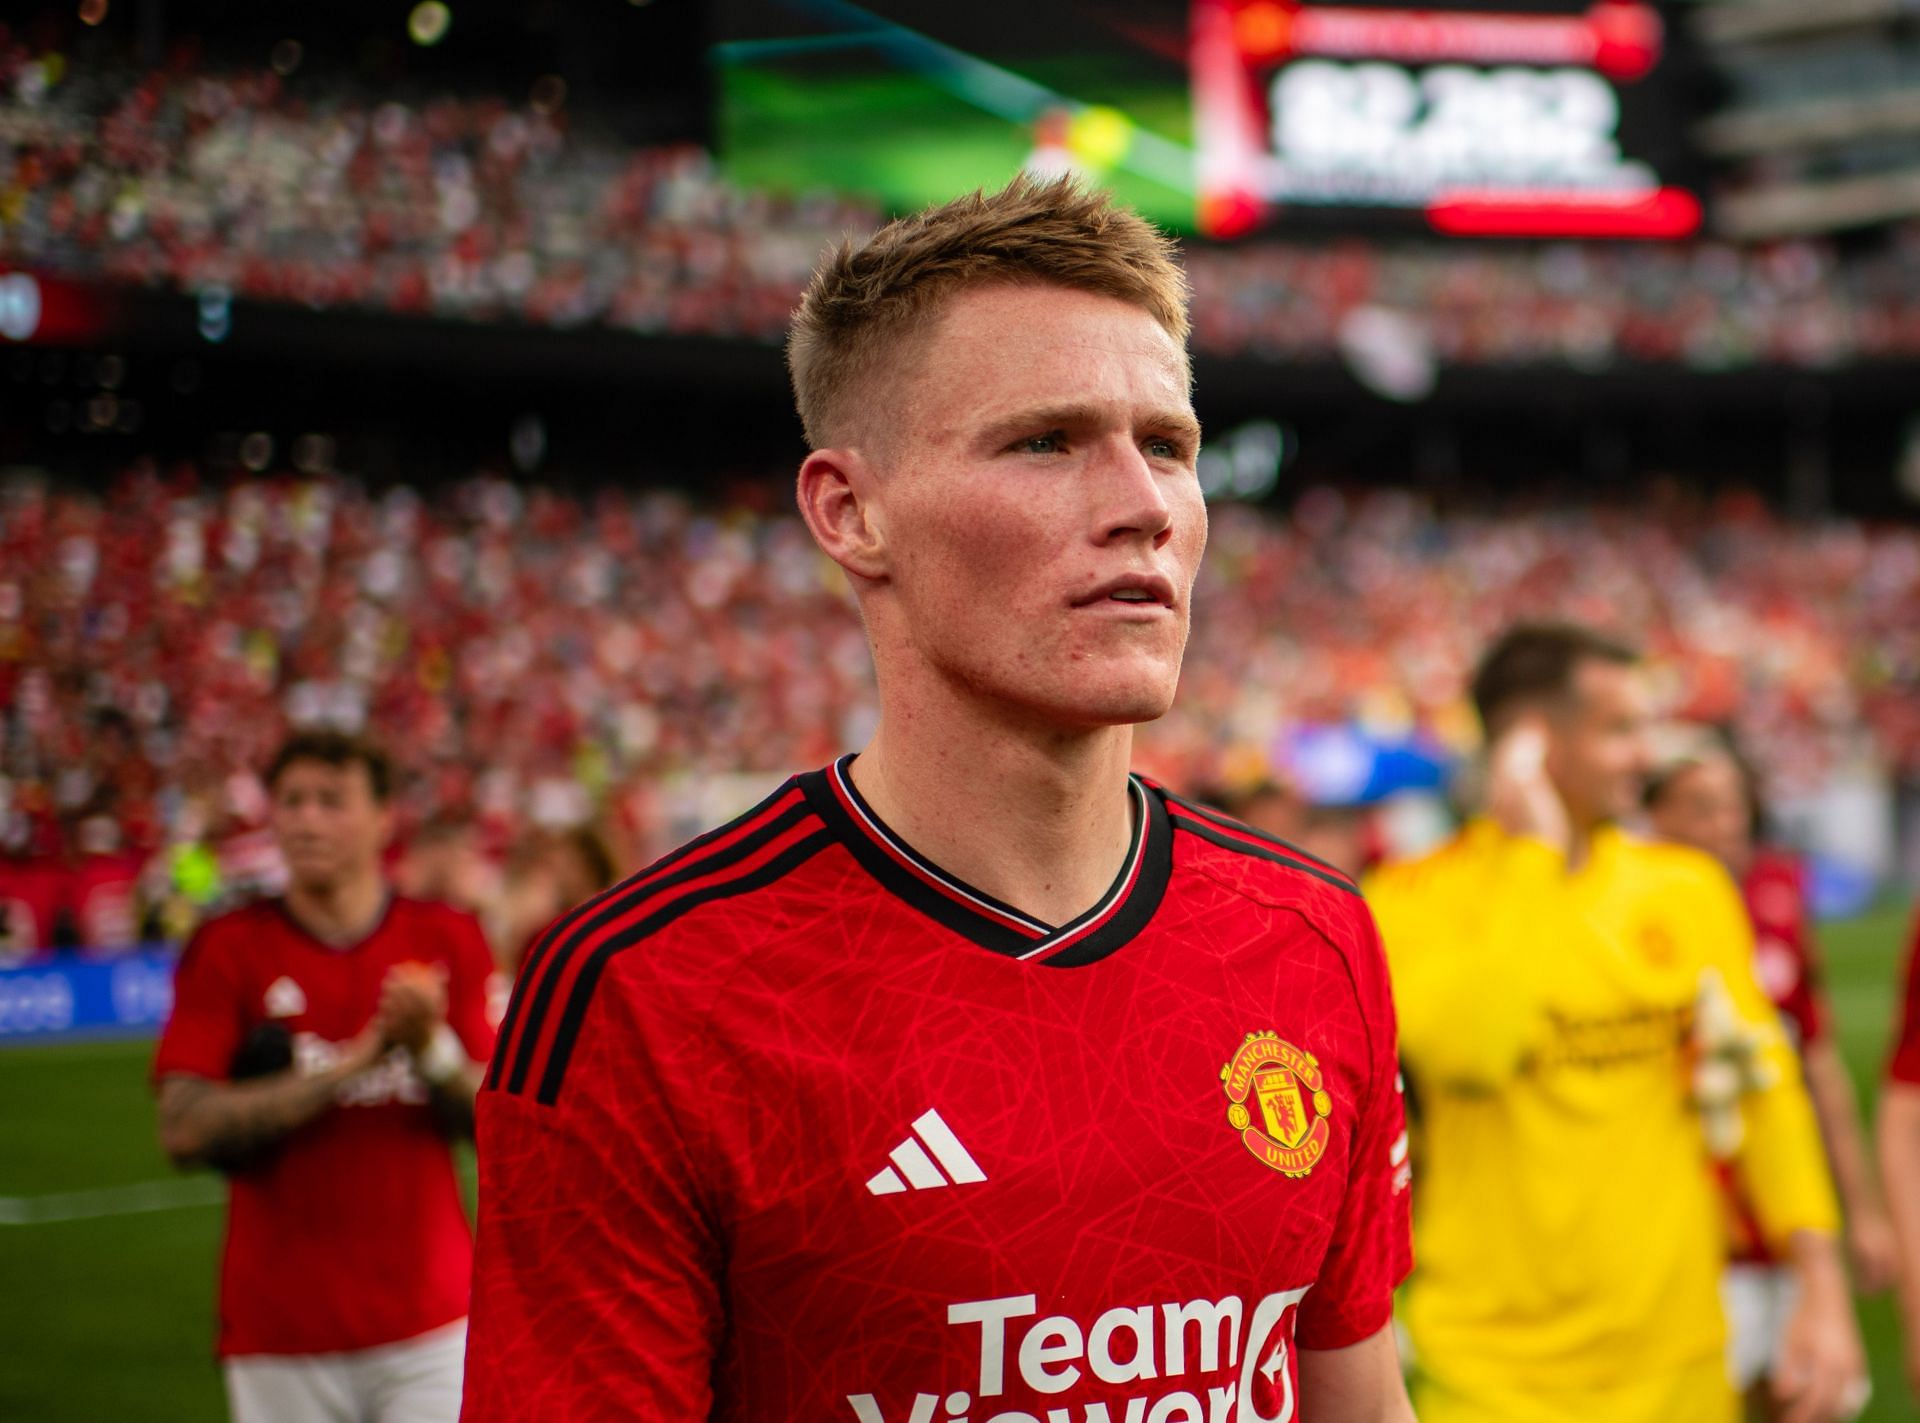 Scott McTominay has been linked to a move to West Ham